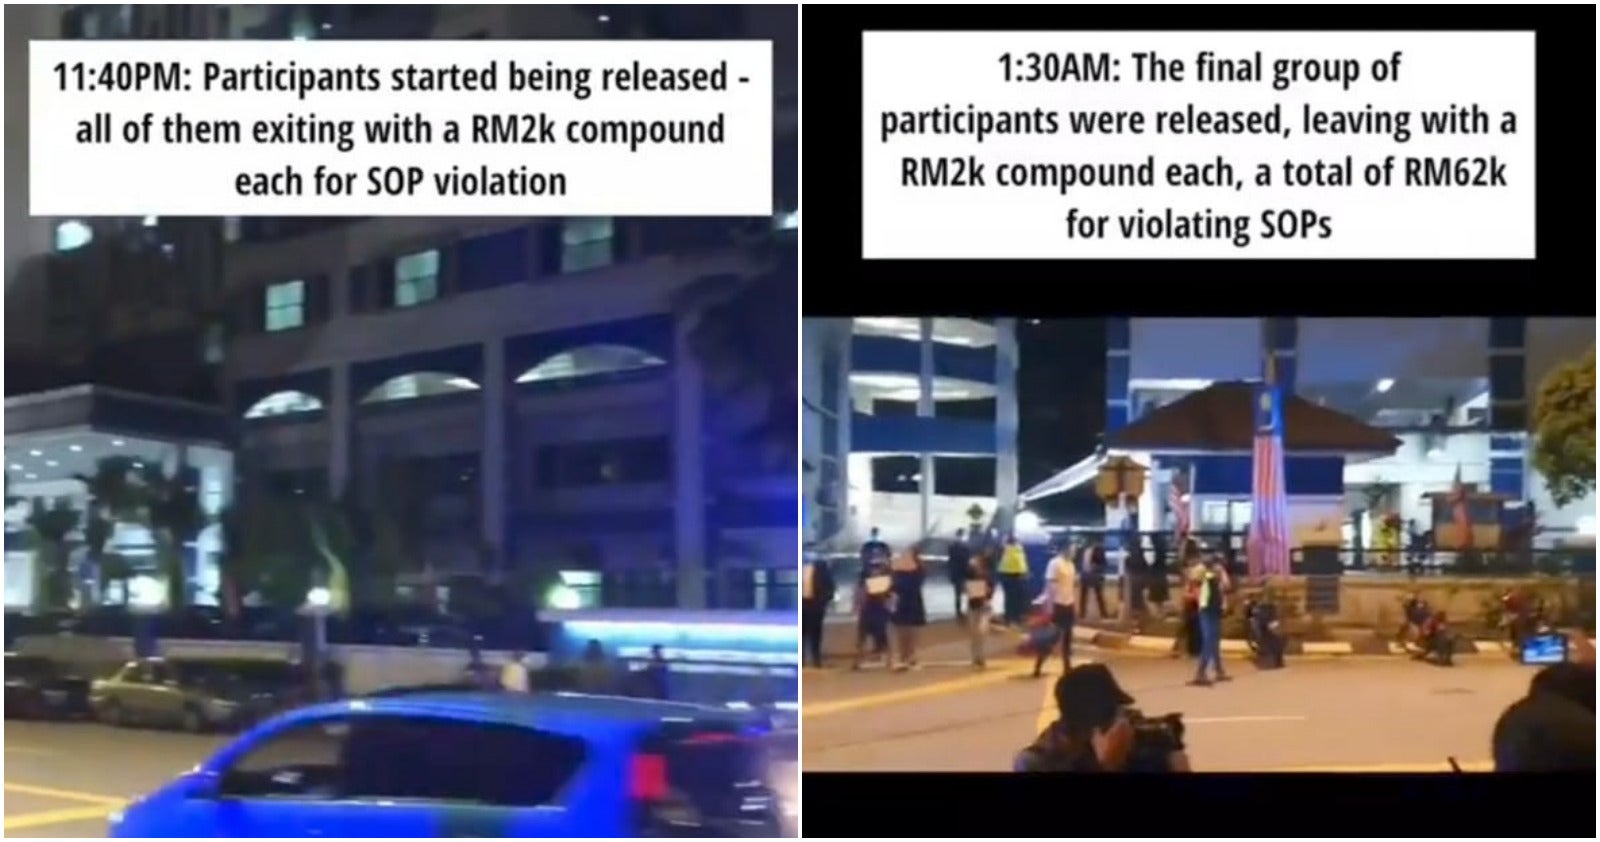 At 1.30 AM Participants released by PDRM with a compound of RM2k each